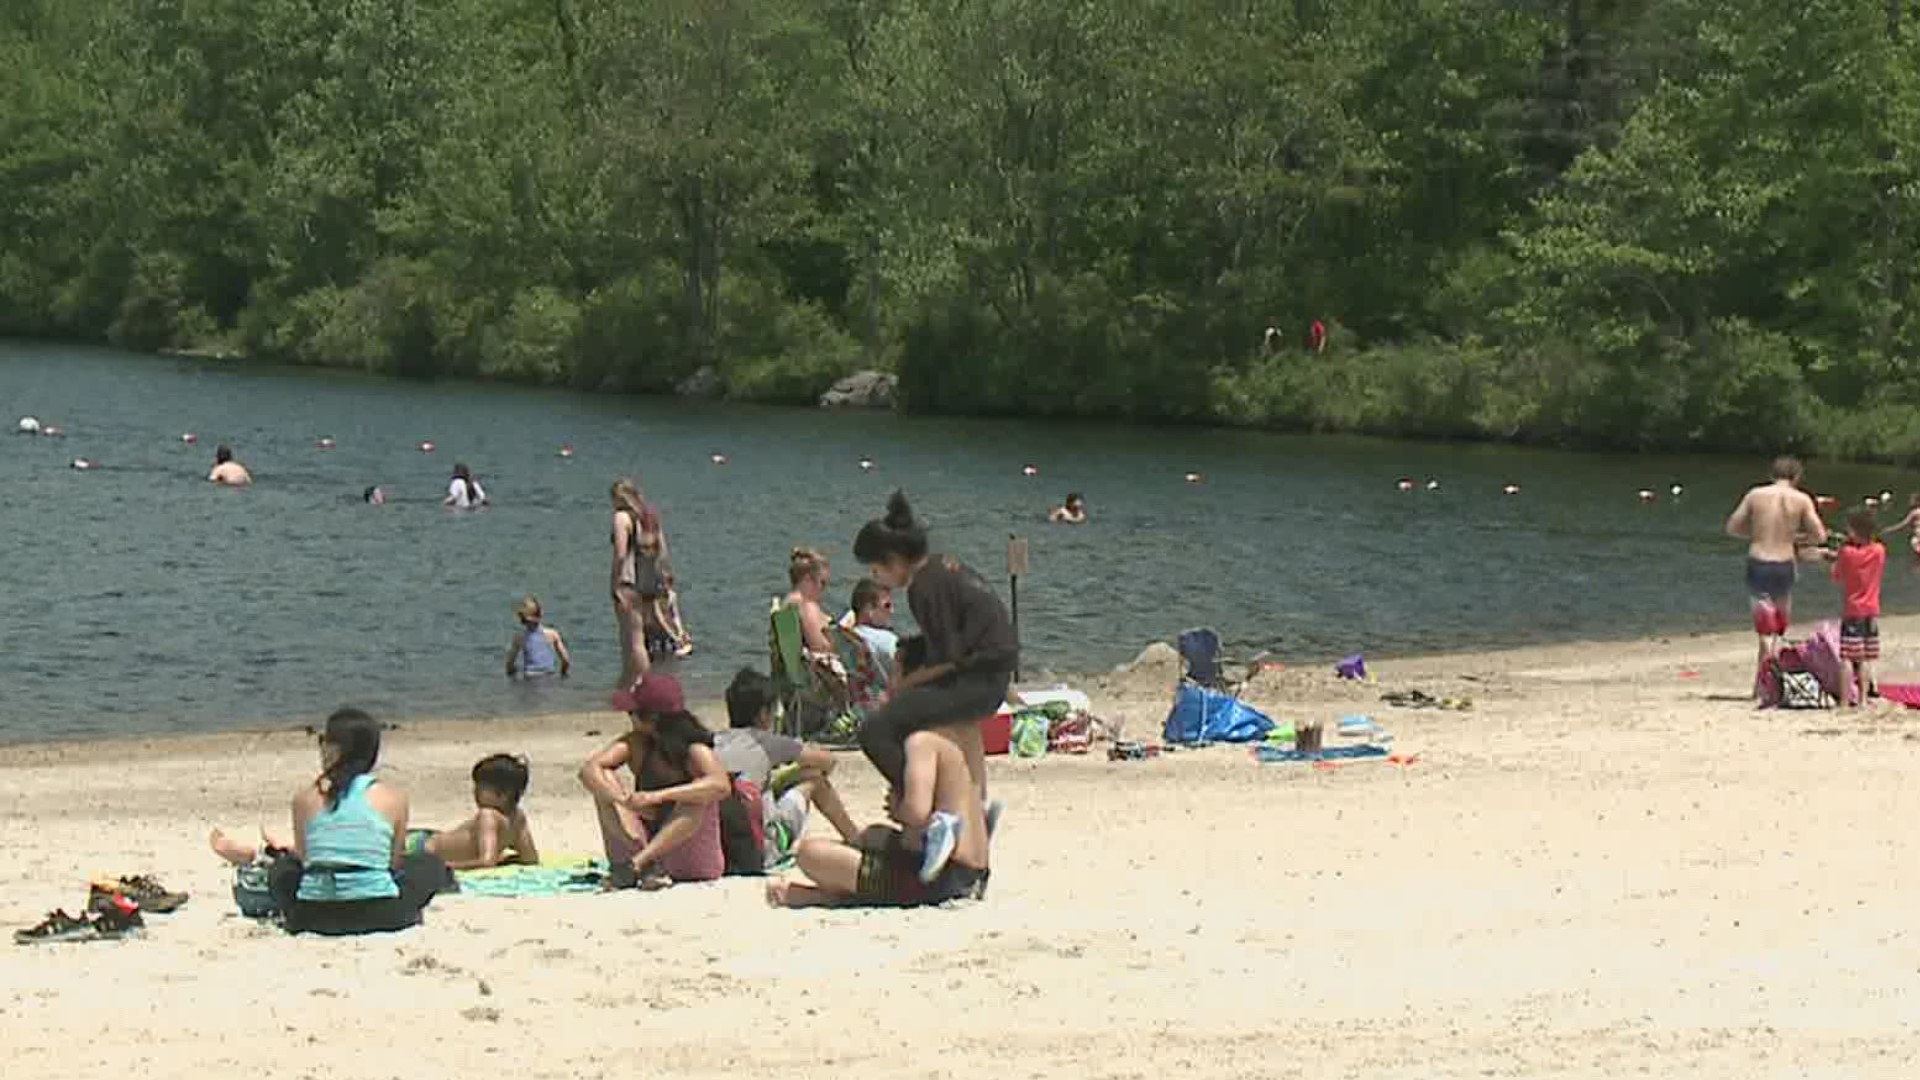 Plenty of people took advantage of the sunshine and warm temperatures in state parks Saturday.